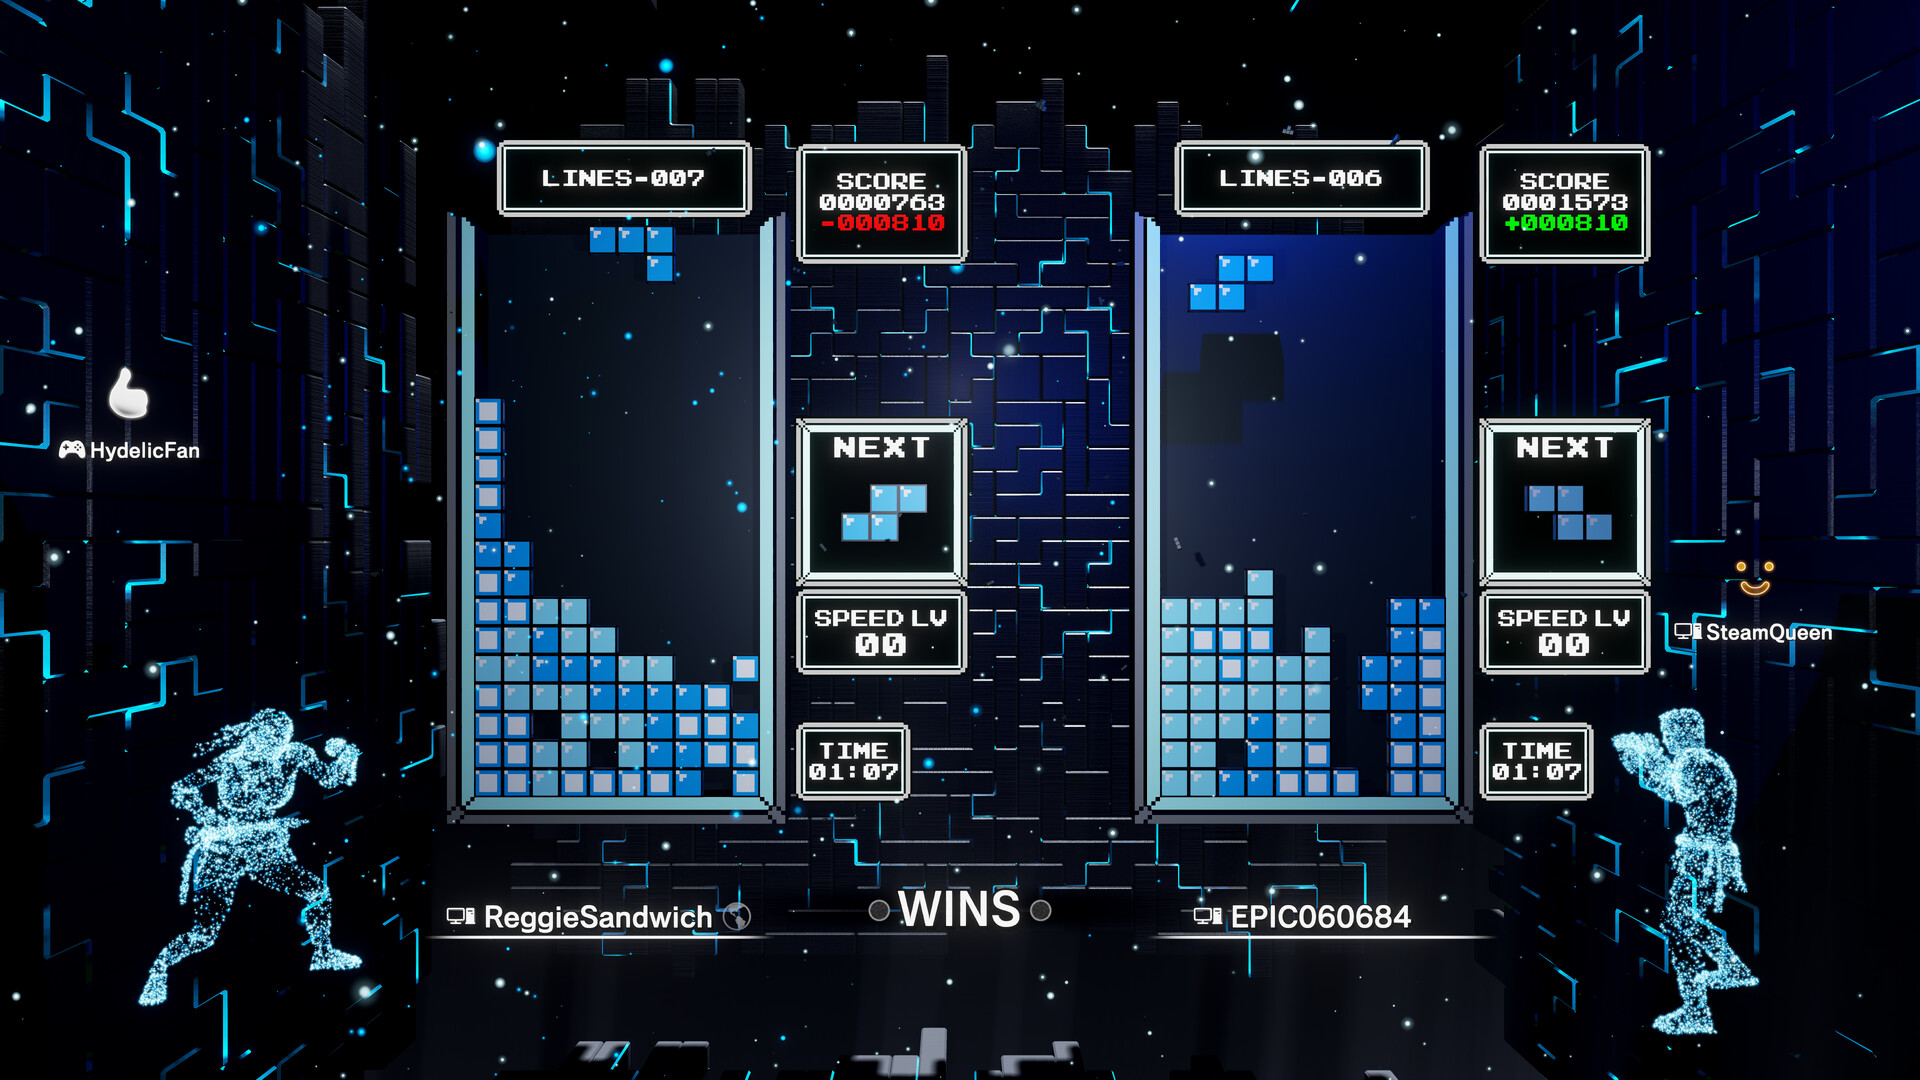 Tetris® Effect: Connected on Steam